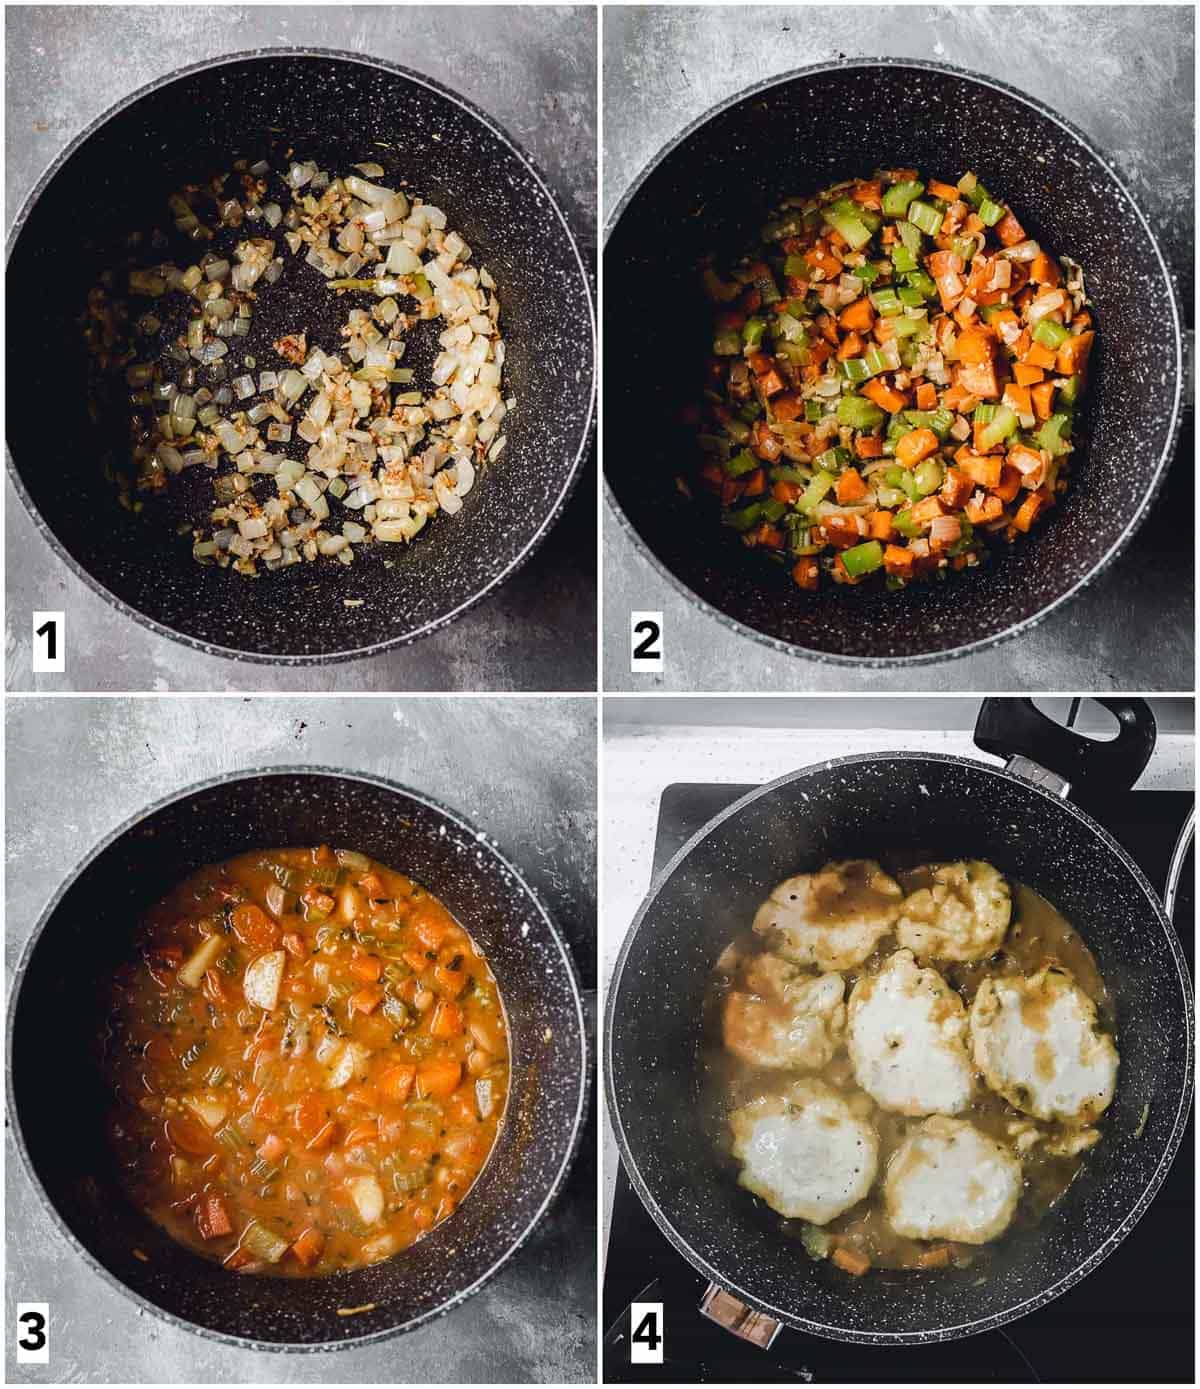 A collage of four images showing four steps in making stew. 